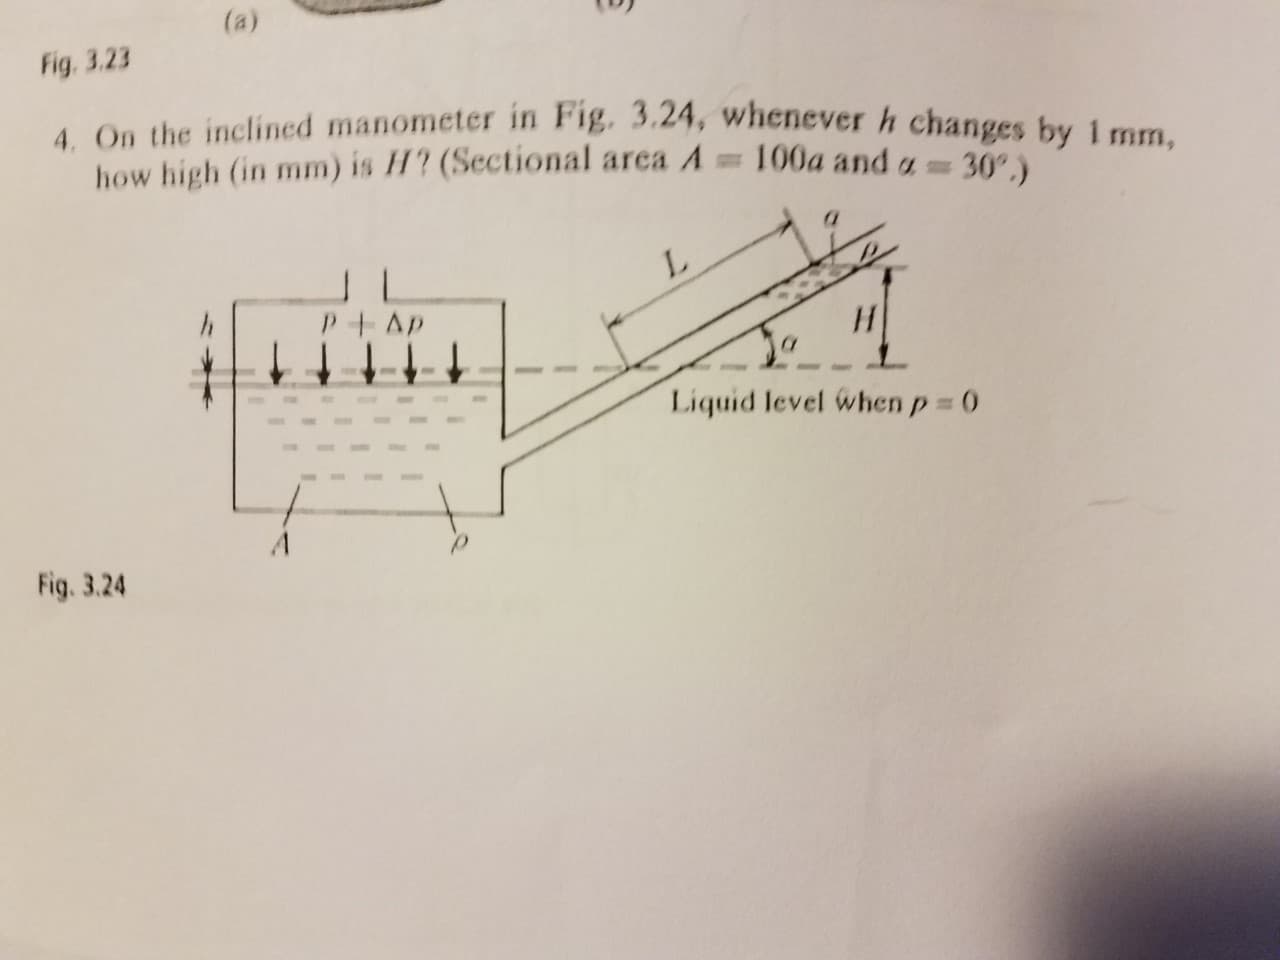 Fig. 3.23
4. On the inclined manometer in Fig. 3.24, whenever
how high (in mm) is H'? (Sectional area A 100a and u30)
h changes by 1 mm,
Liquid level when p
Fig. 3.24
